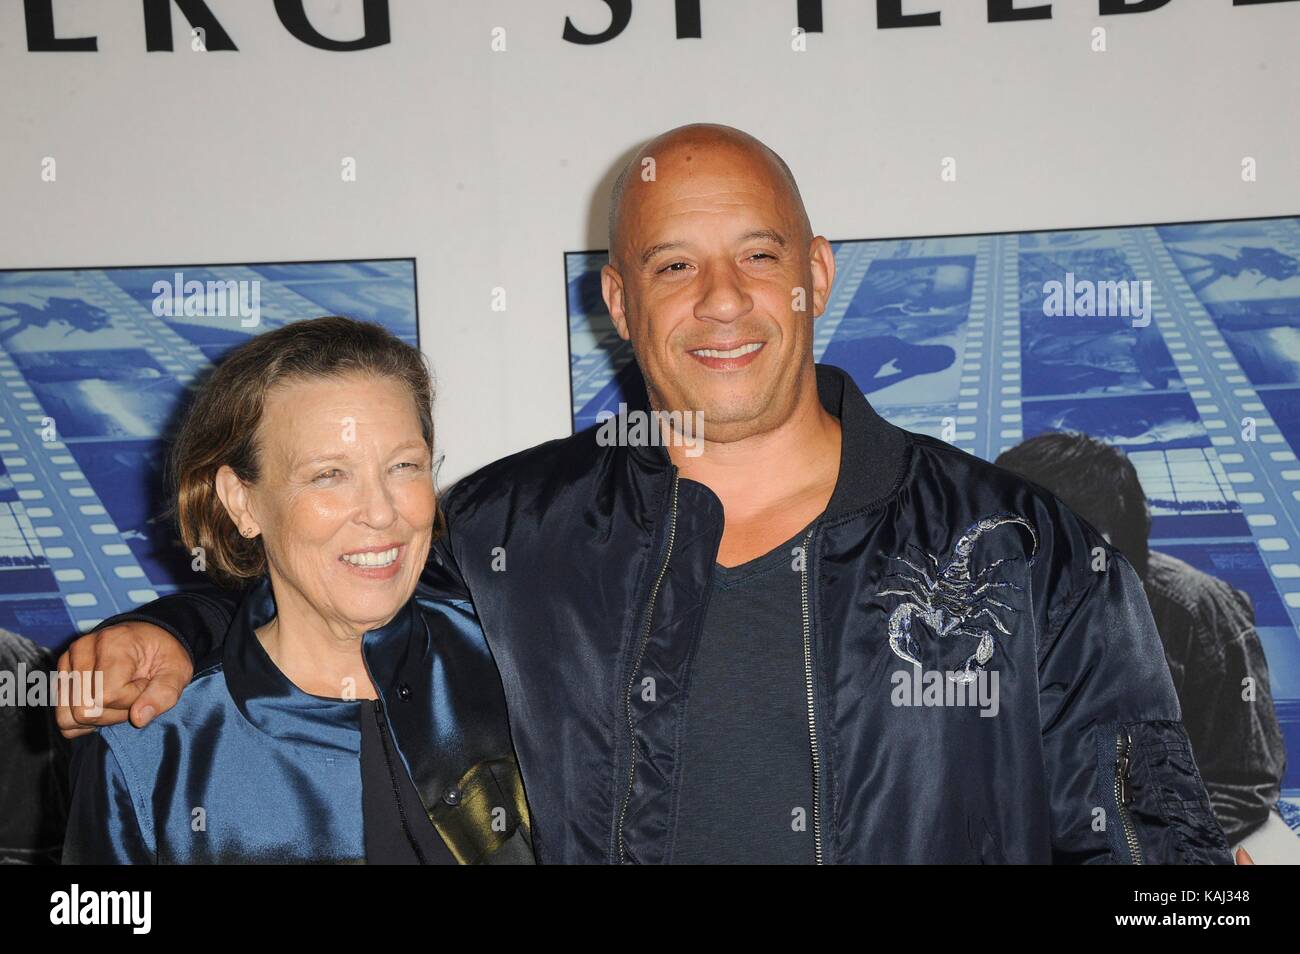 Los Angeles, CA, USA. 26th Sep, 2017. Delora Vincent, Vin Diesel at arrivals for HBO's Documentary Film SPIELBERG Premiere, Paramount Studios, Los Angeles, CA September 26, 2017. Credit: Elizabeth Goodenough/Everett Collection/Alamy Live News Stock Photo